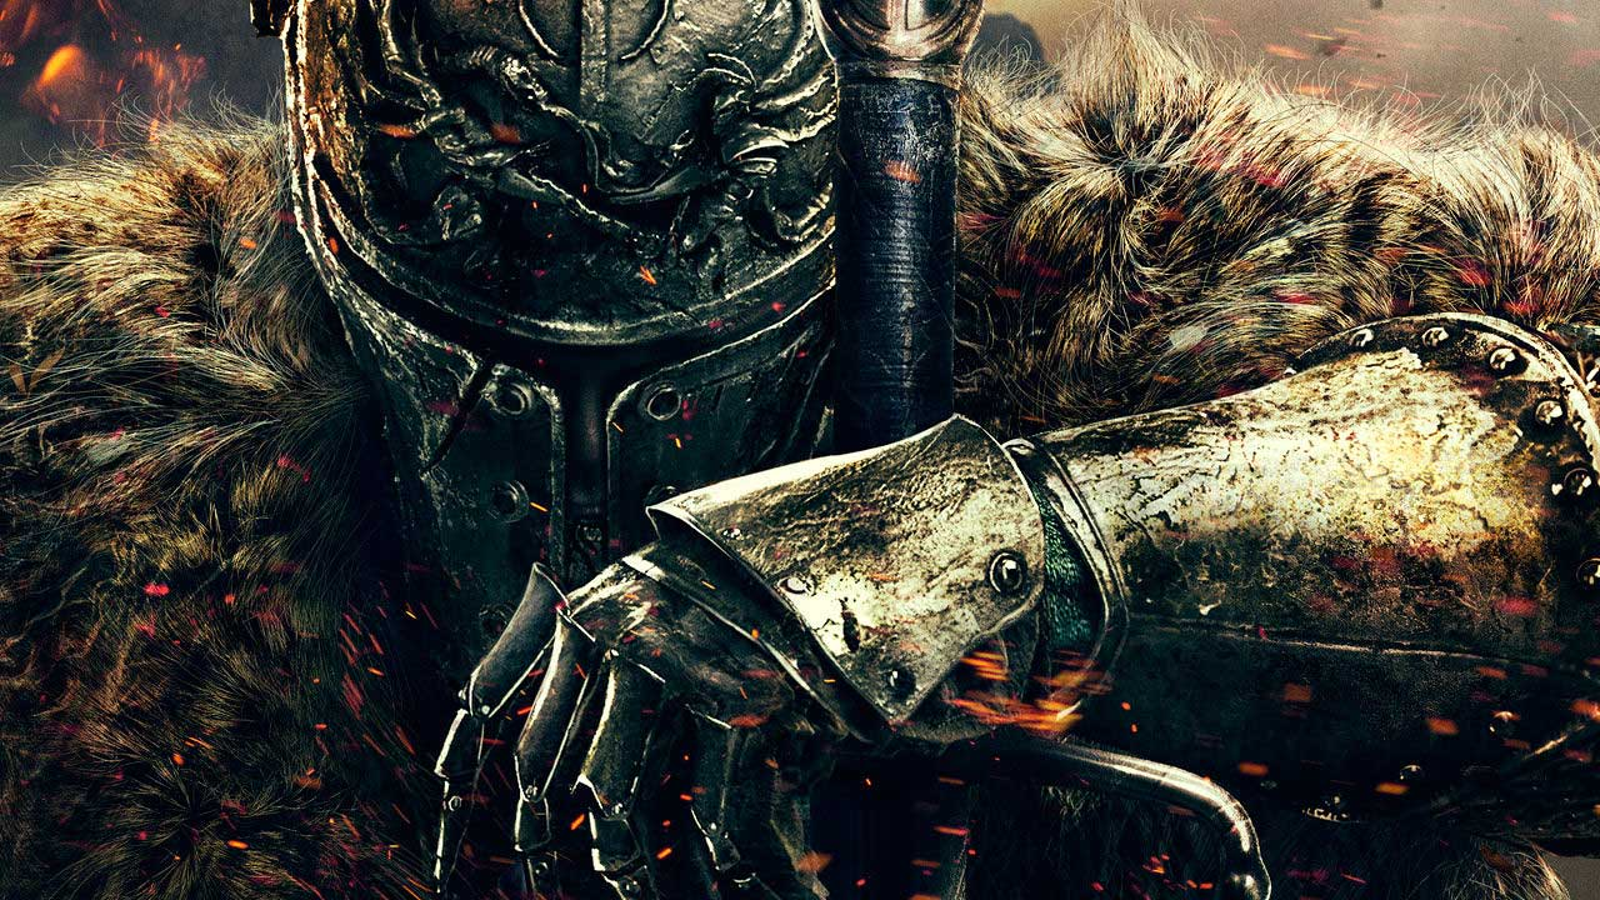 What you need to know before playing Dark Souls III